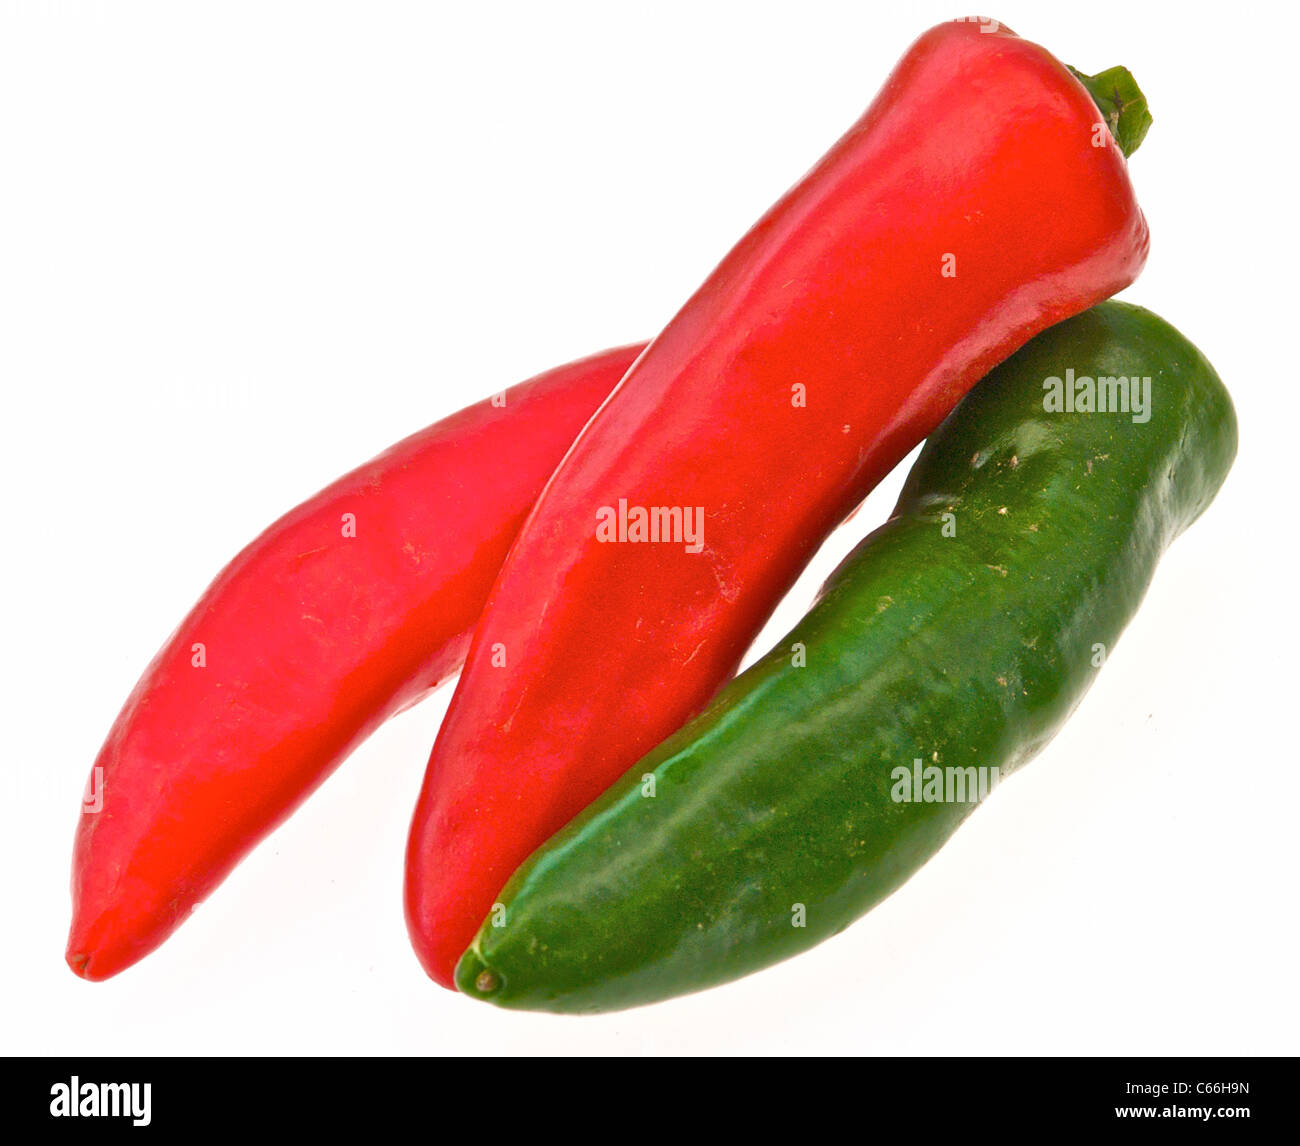 CULINARY HERBS HERB Chillies Chili Pepper (capsicum frutescens) a much used flavouring Stock Photo